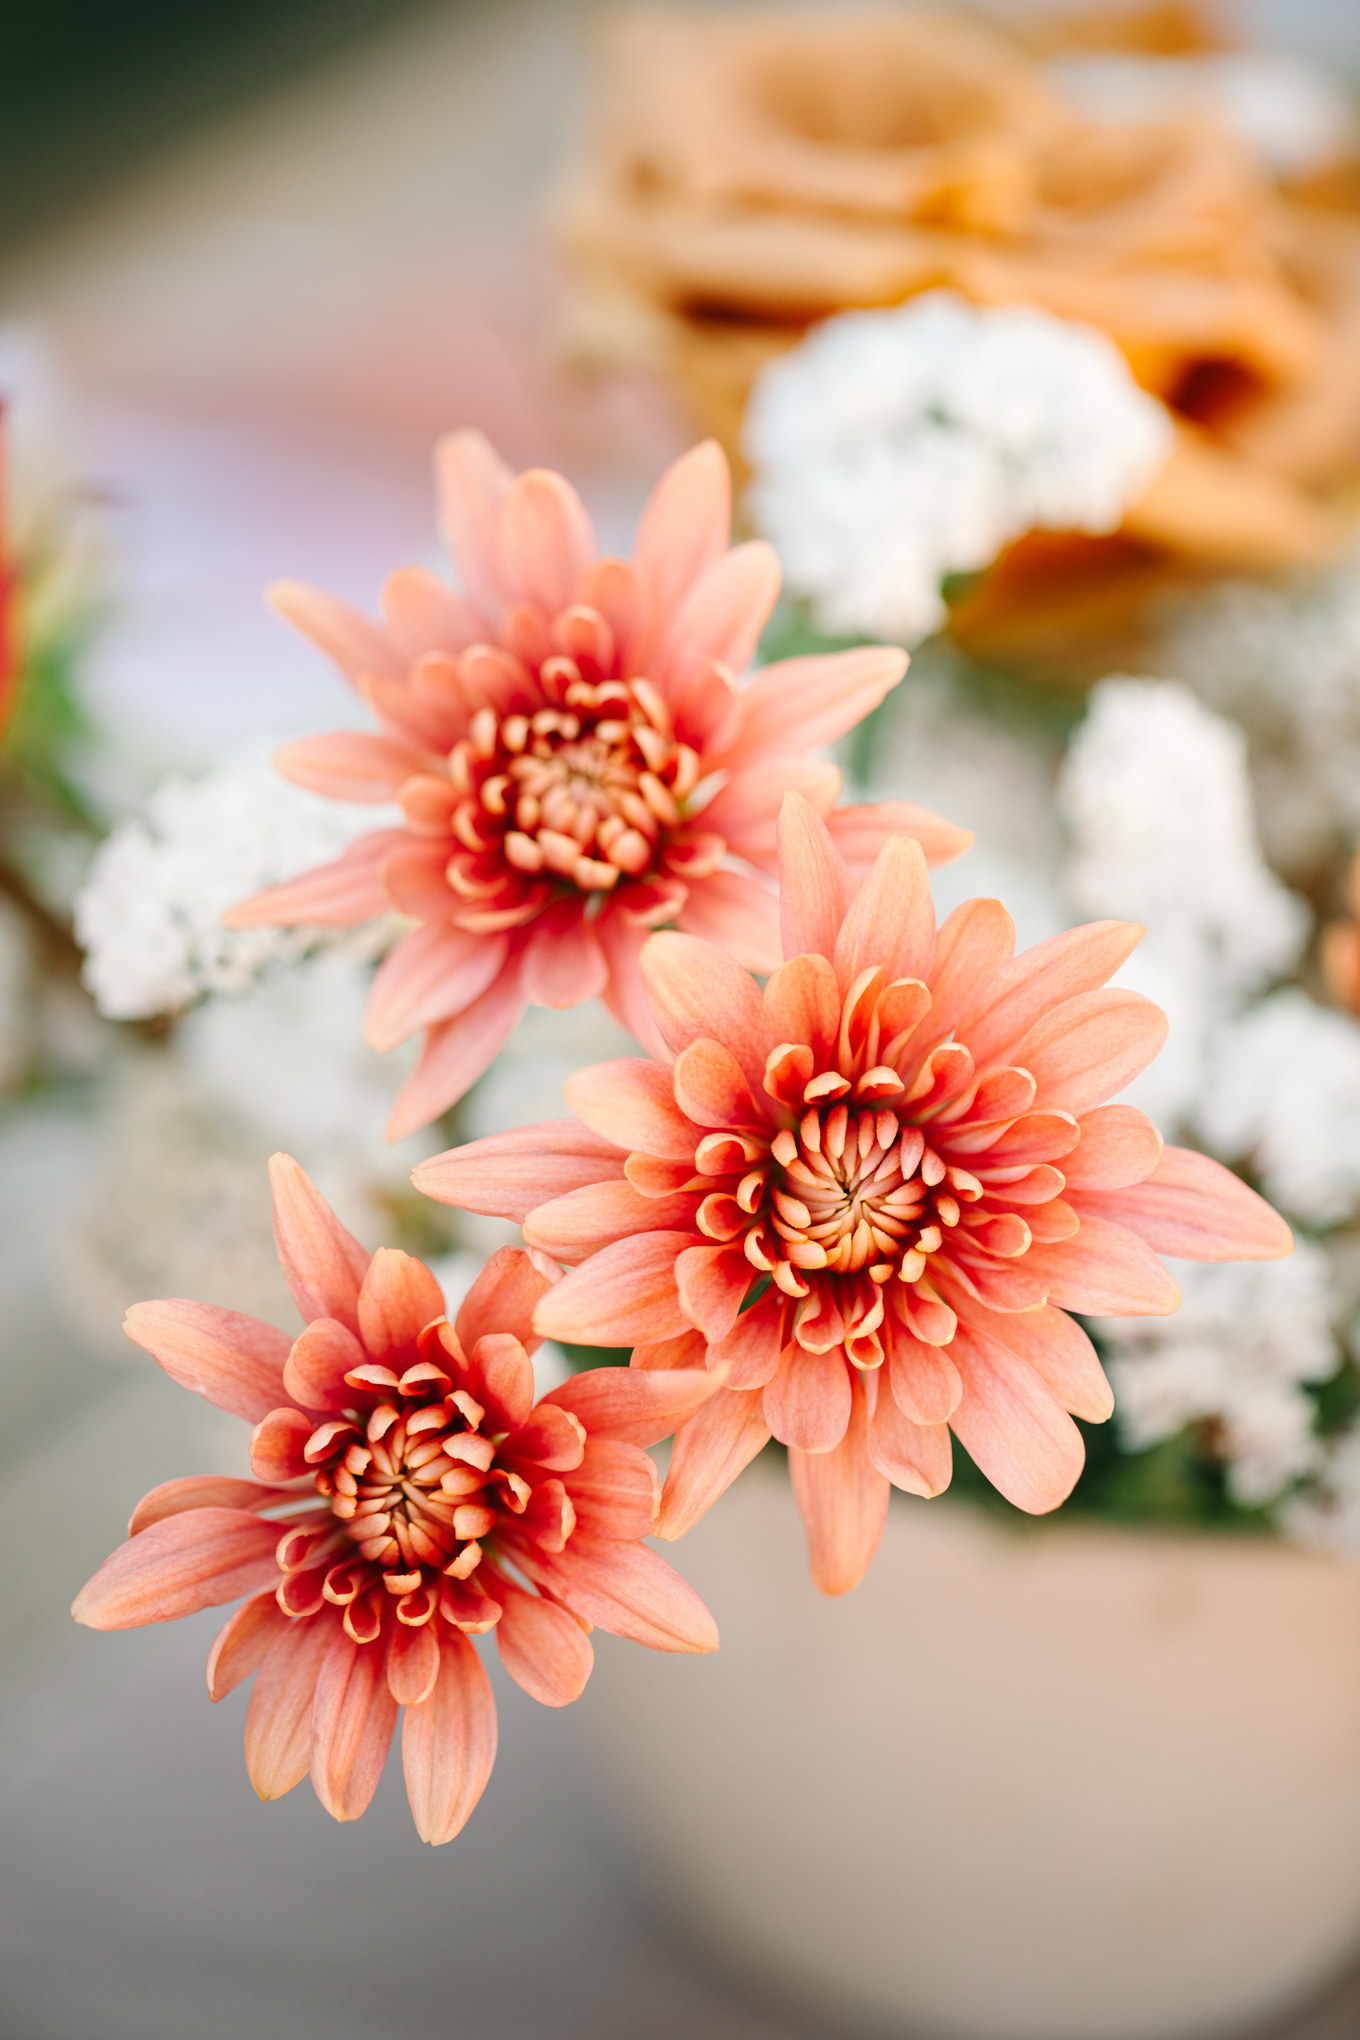 Flower close up | Pink and orange Lautner Compound wedding | Colorful Palm Springs wedding photography | #palmspringsphotographer #palmspringswedding #lautnercompound #southerncaliforniawedding  Source: Mary Costa Photography | Los Angeles